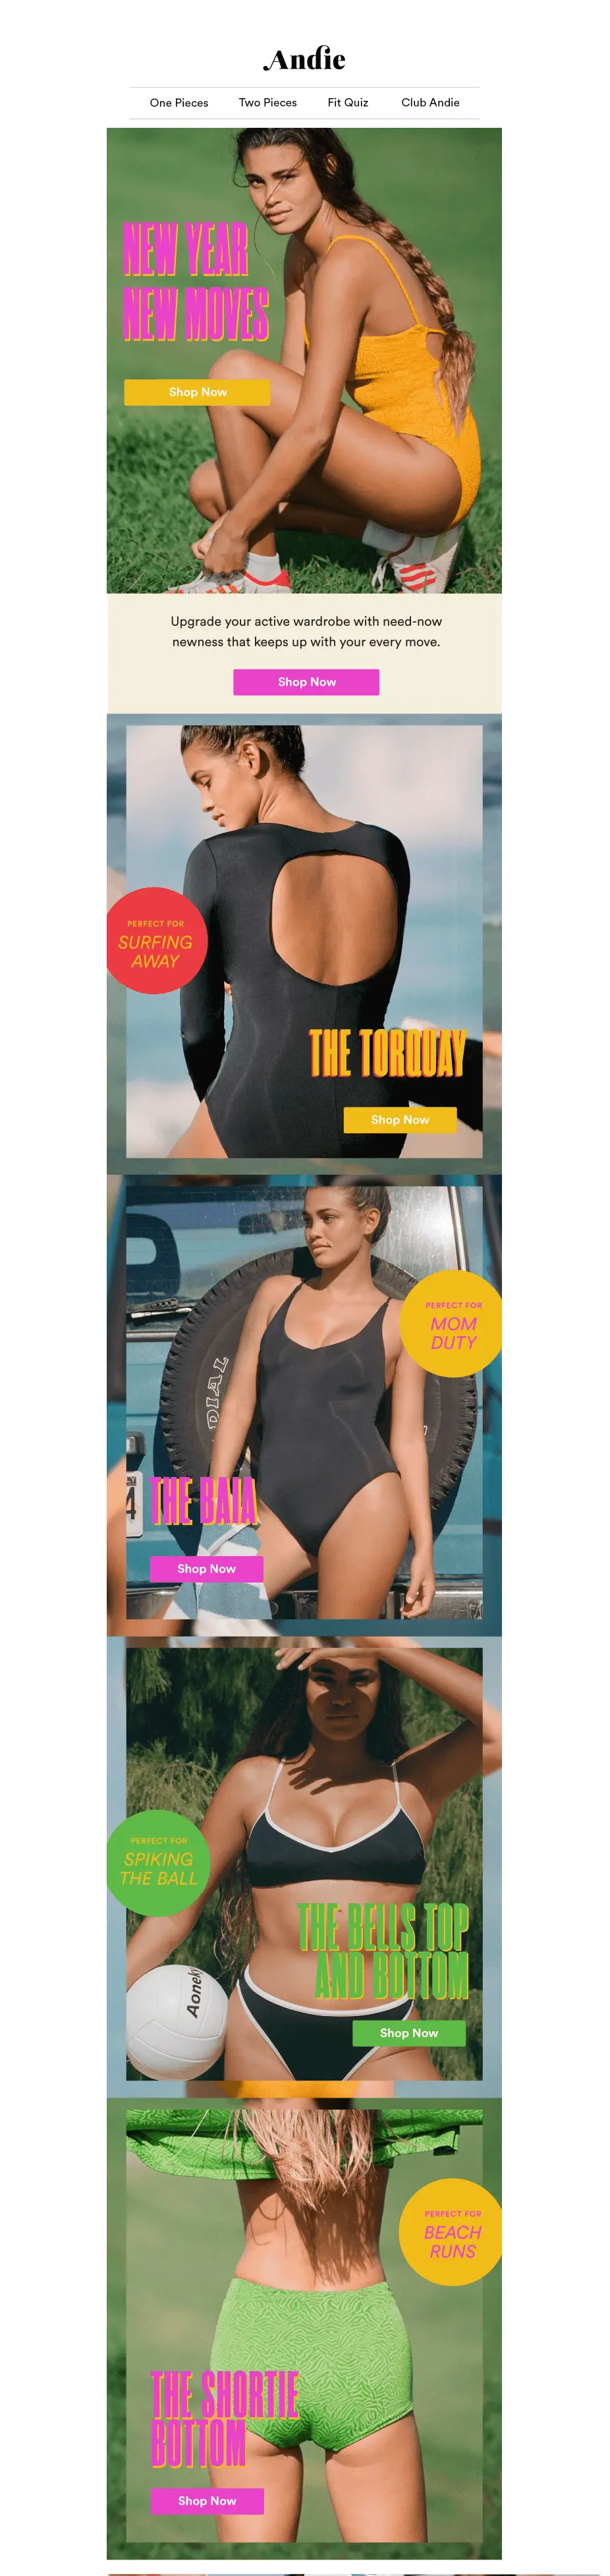 image shows a marketing email from Andie Swim